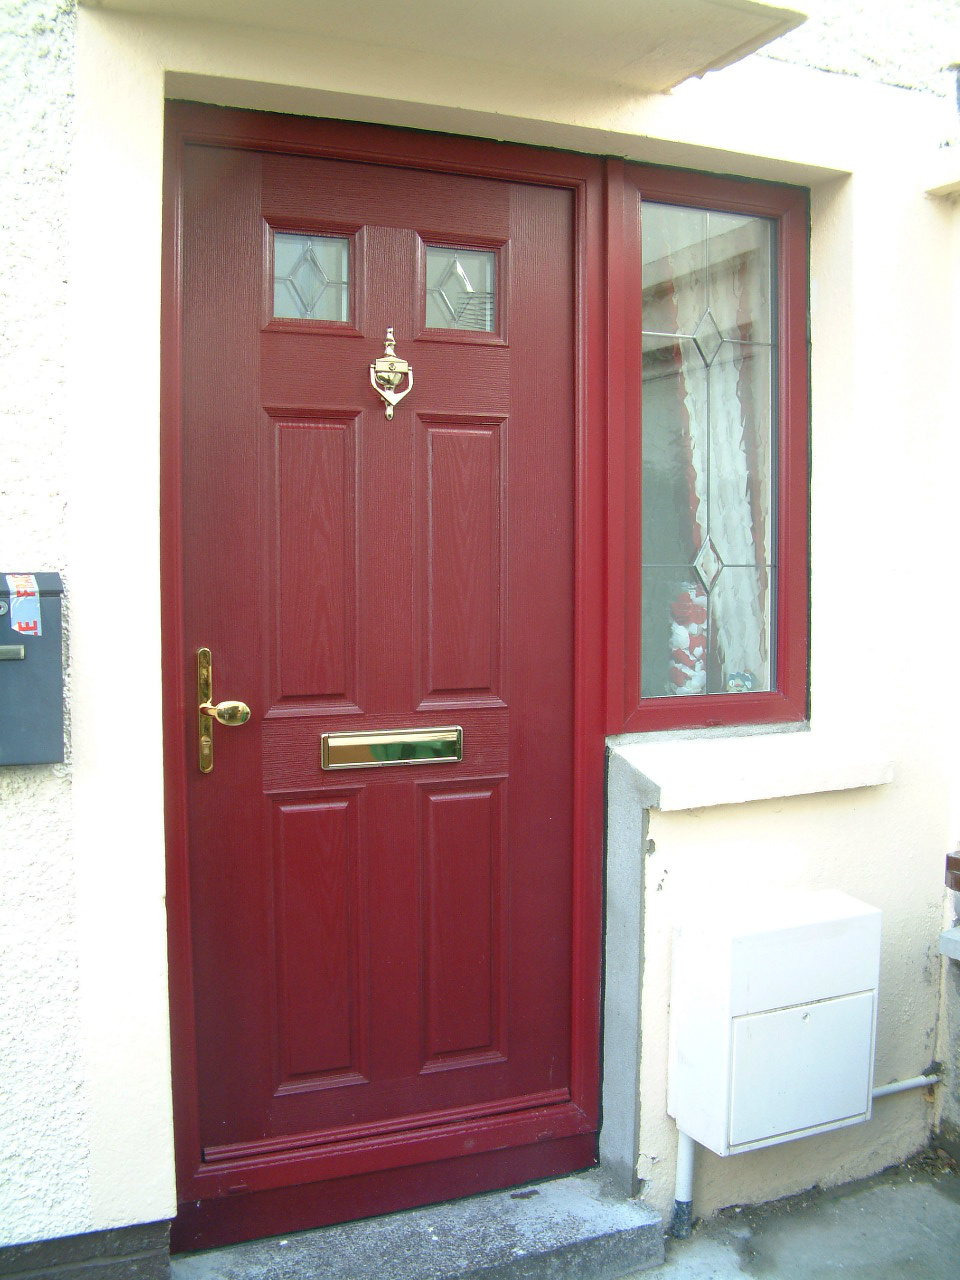 RED APEER APA2 COMPOSITE FRONT DOOR
FITTED BY ASGARD WINDOWS IN DUBLIN.